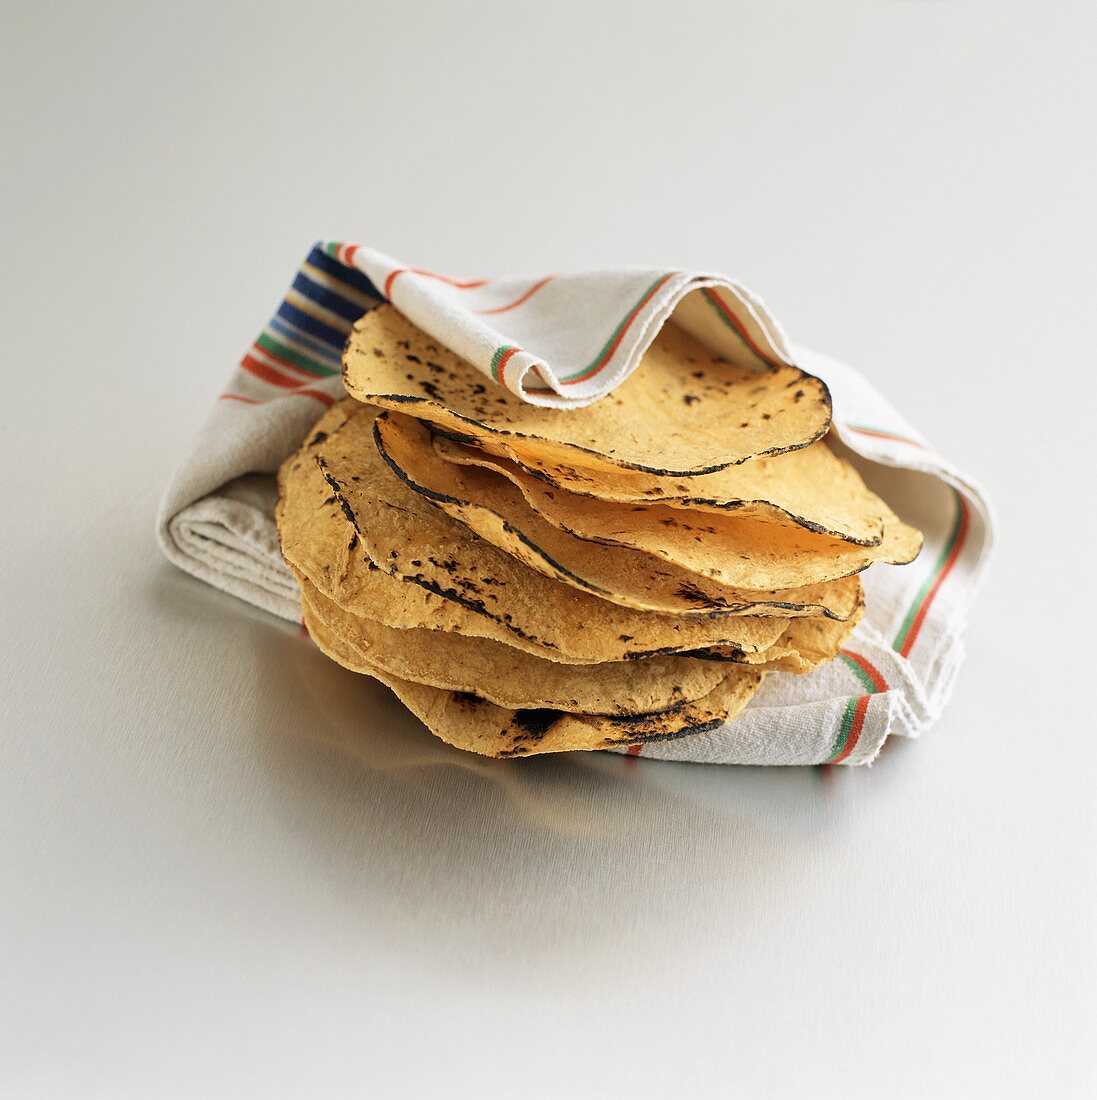 Toasted Tortillas in a Towel